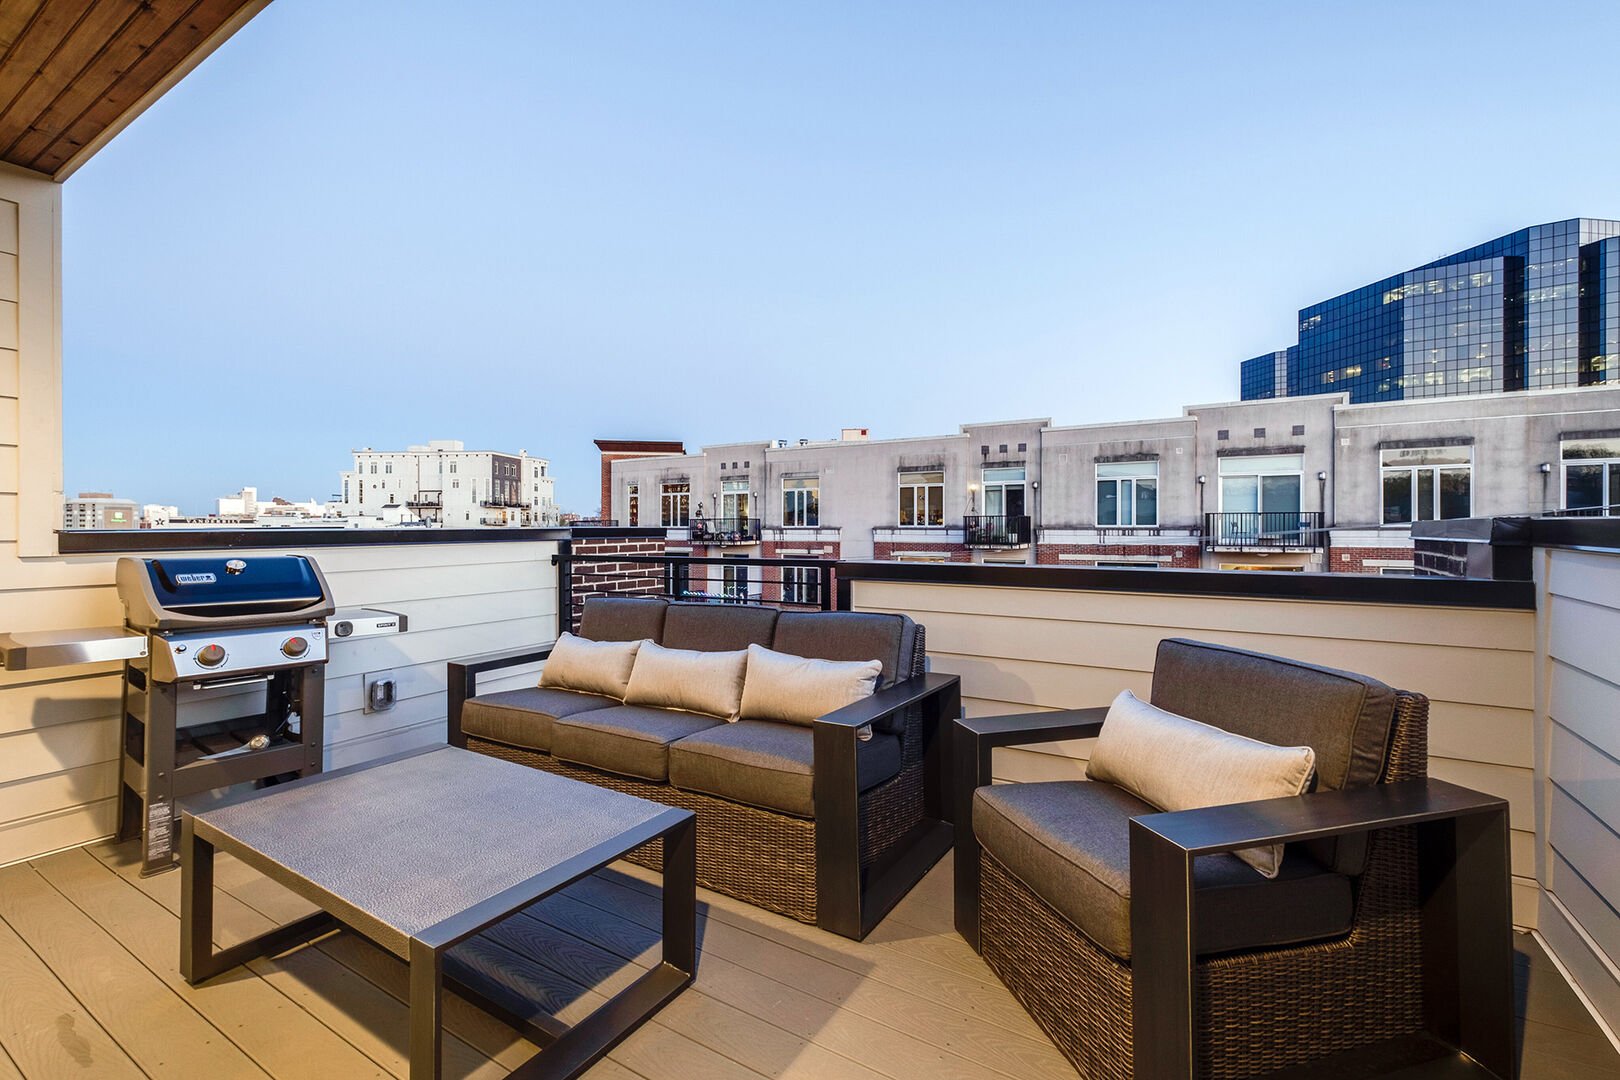 Private top floor deck with multiple seating and BBQ grill